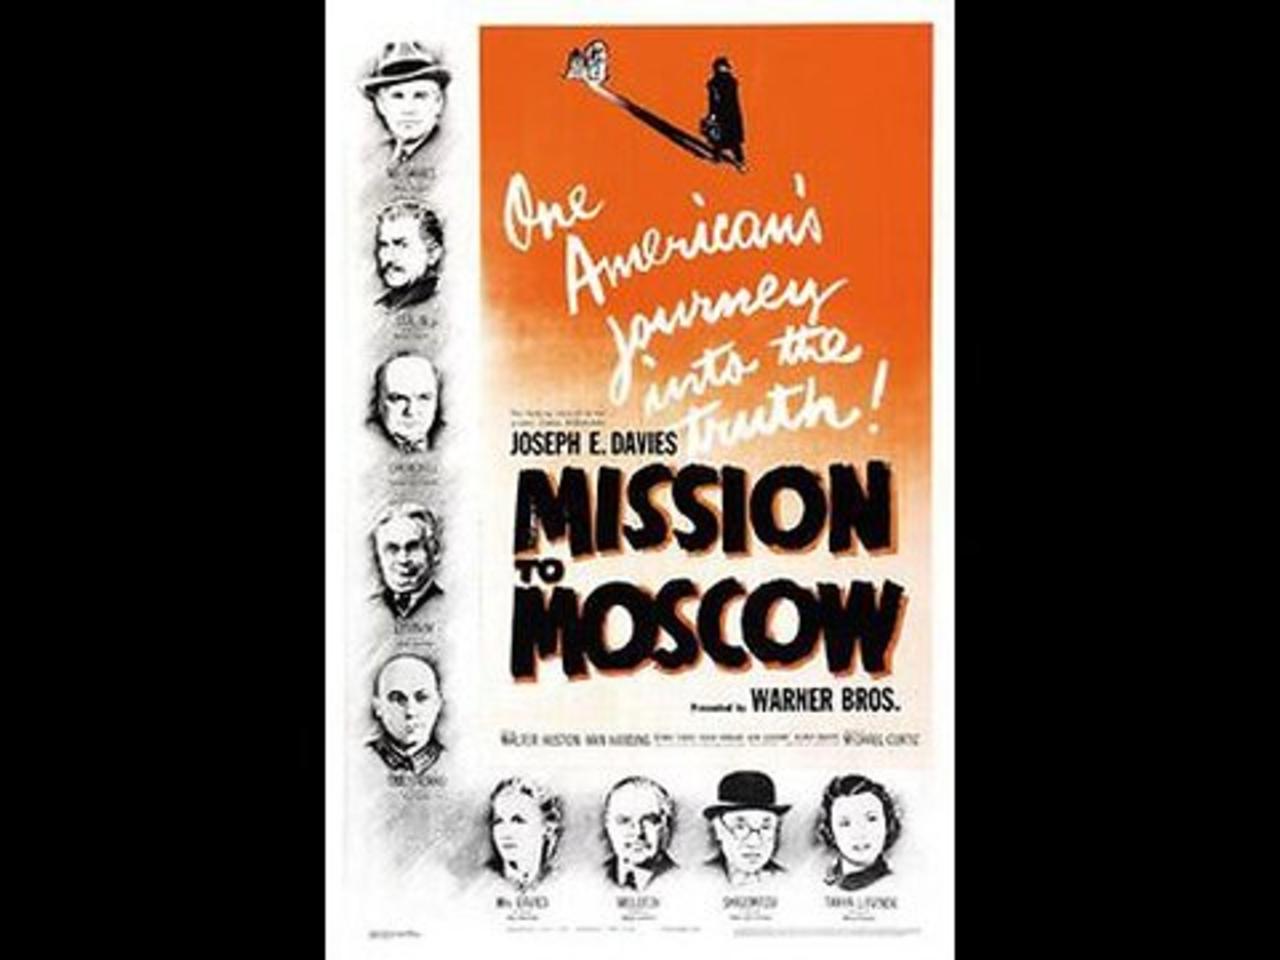 Mission to Moscow ... 1943 film trailer